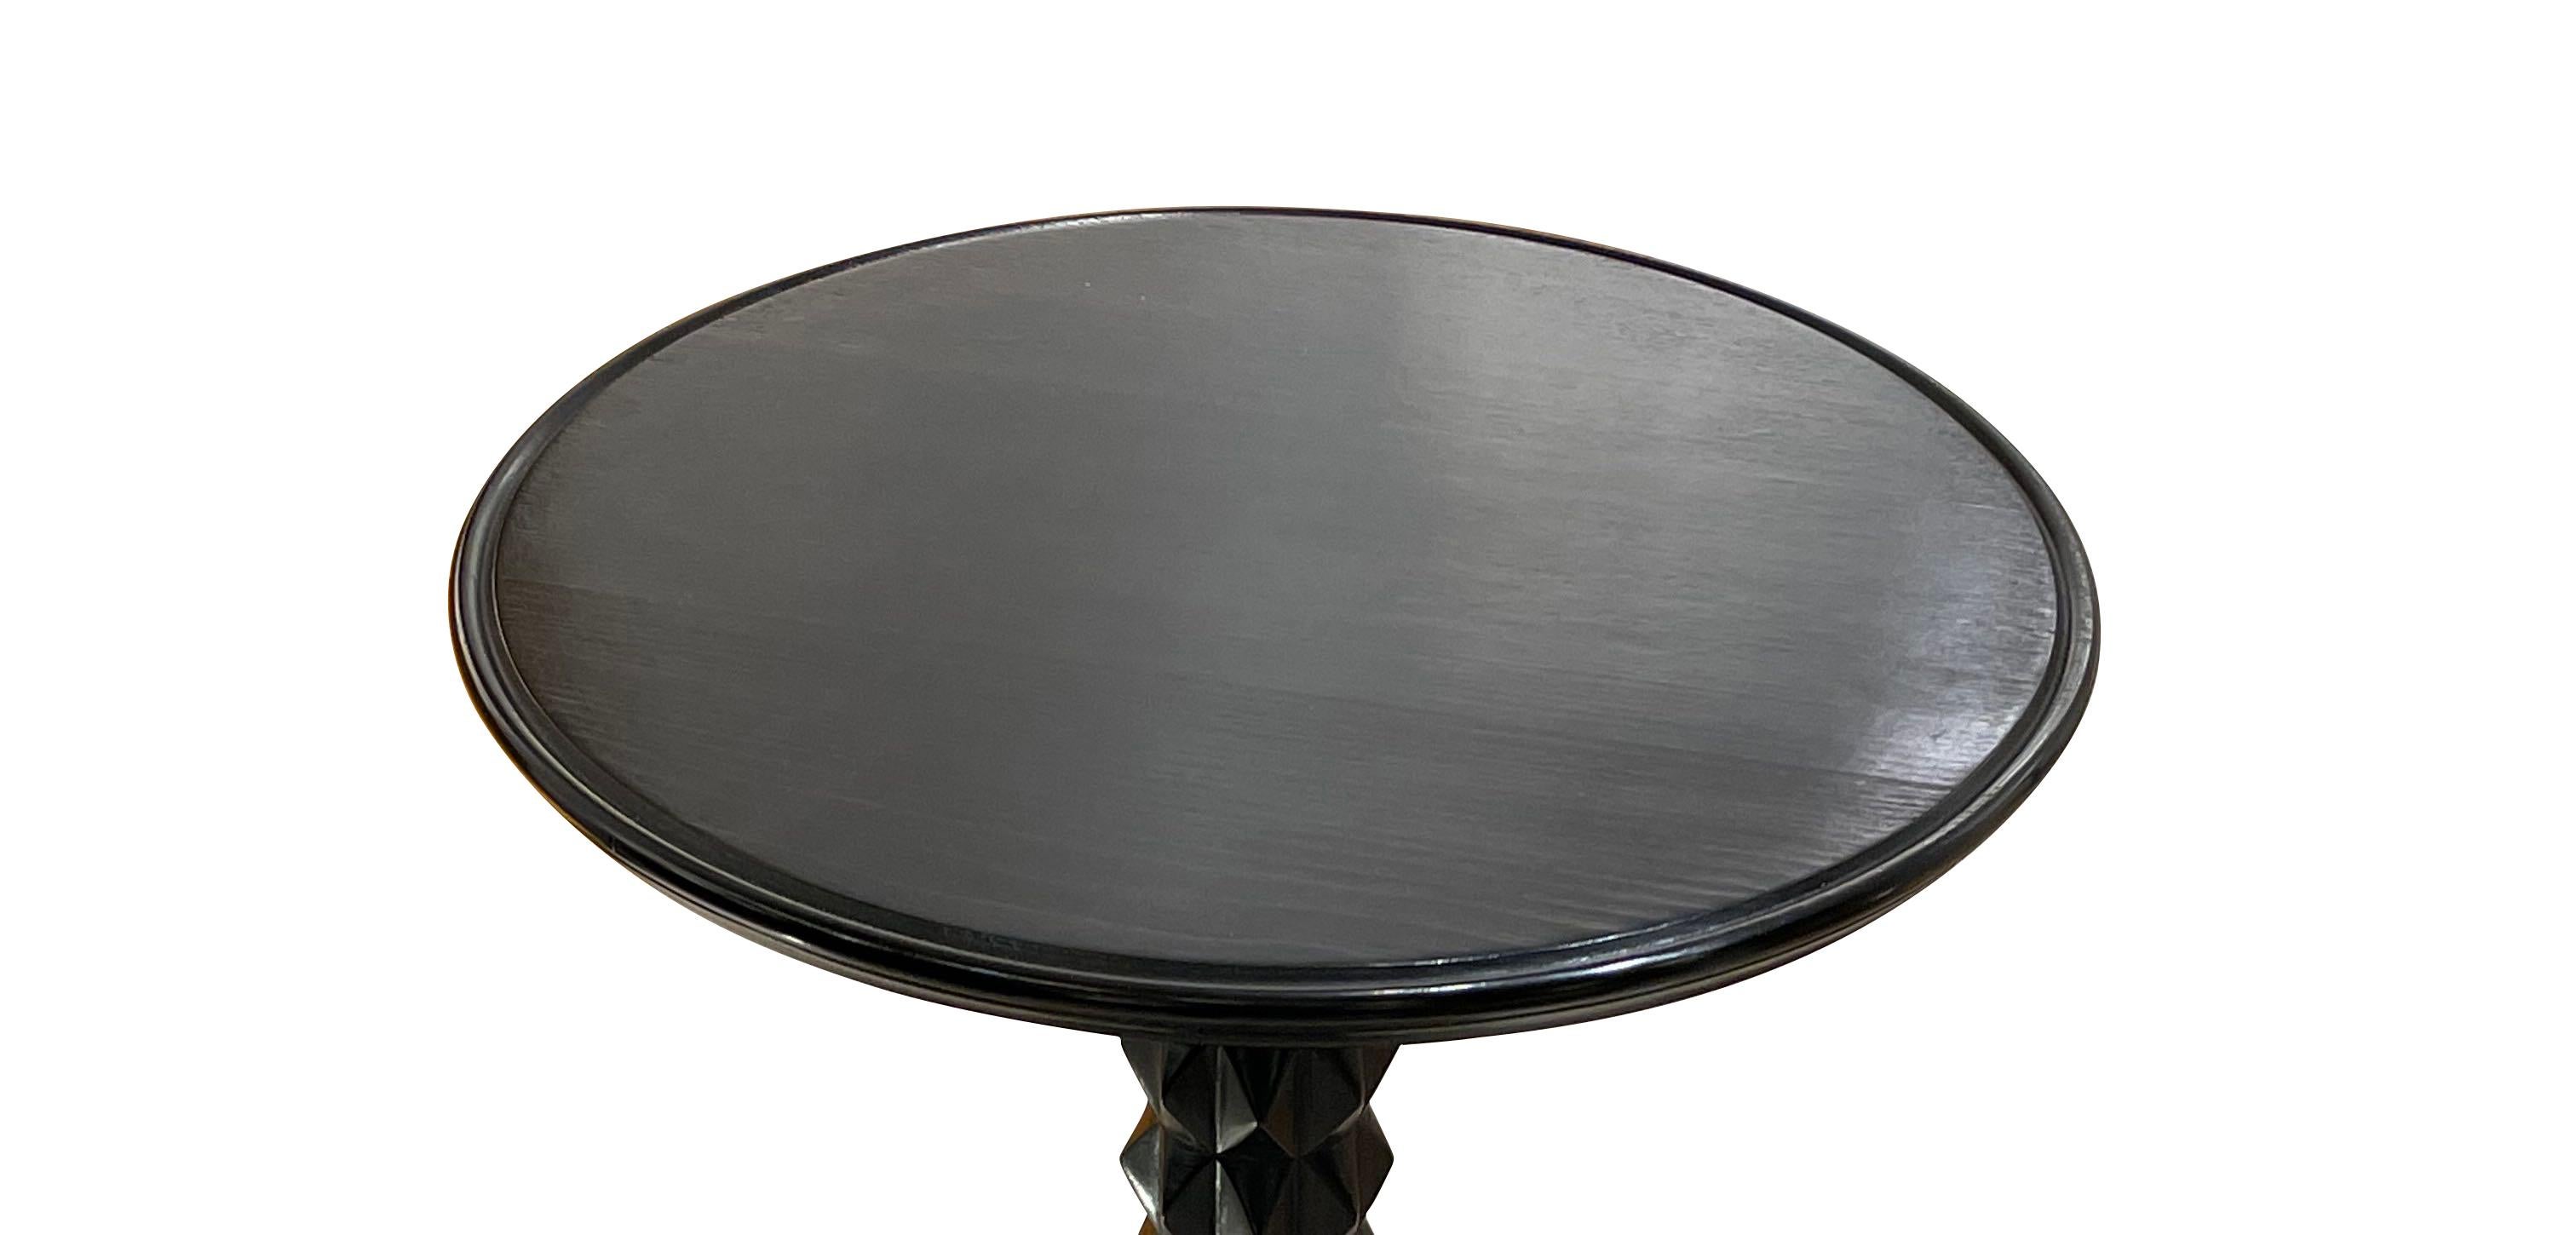 1940's French Charles Dudouyt ebonized side table.
The column is sculpted in a signature design of Charles Dudouyt.
The round top has a raised lip detail.
Three dimensional raised rings decorate the base.
This table can be used as a side or cocktail